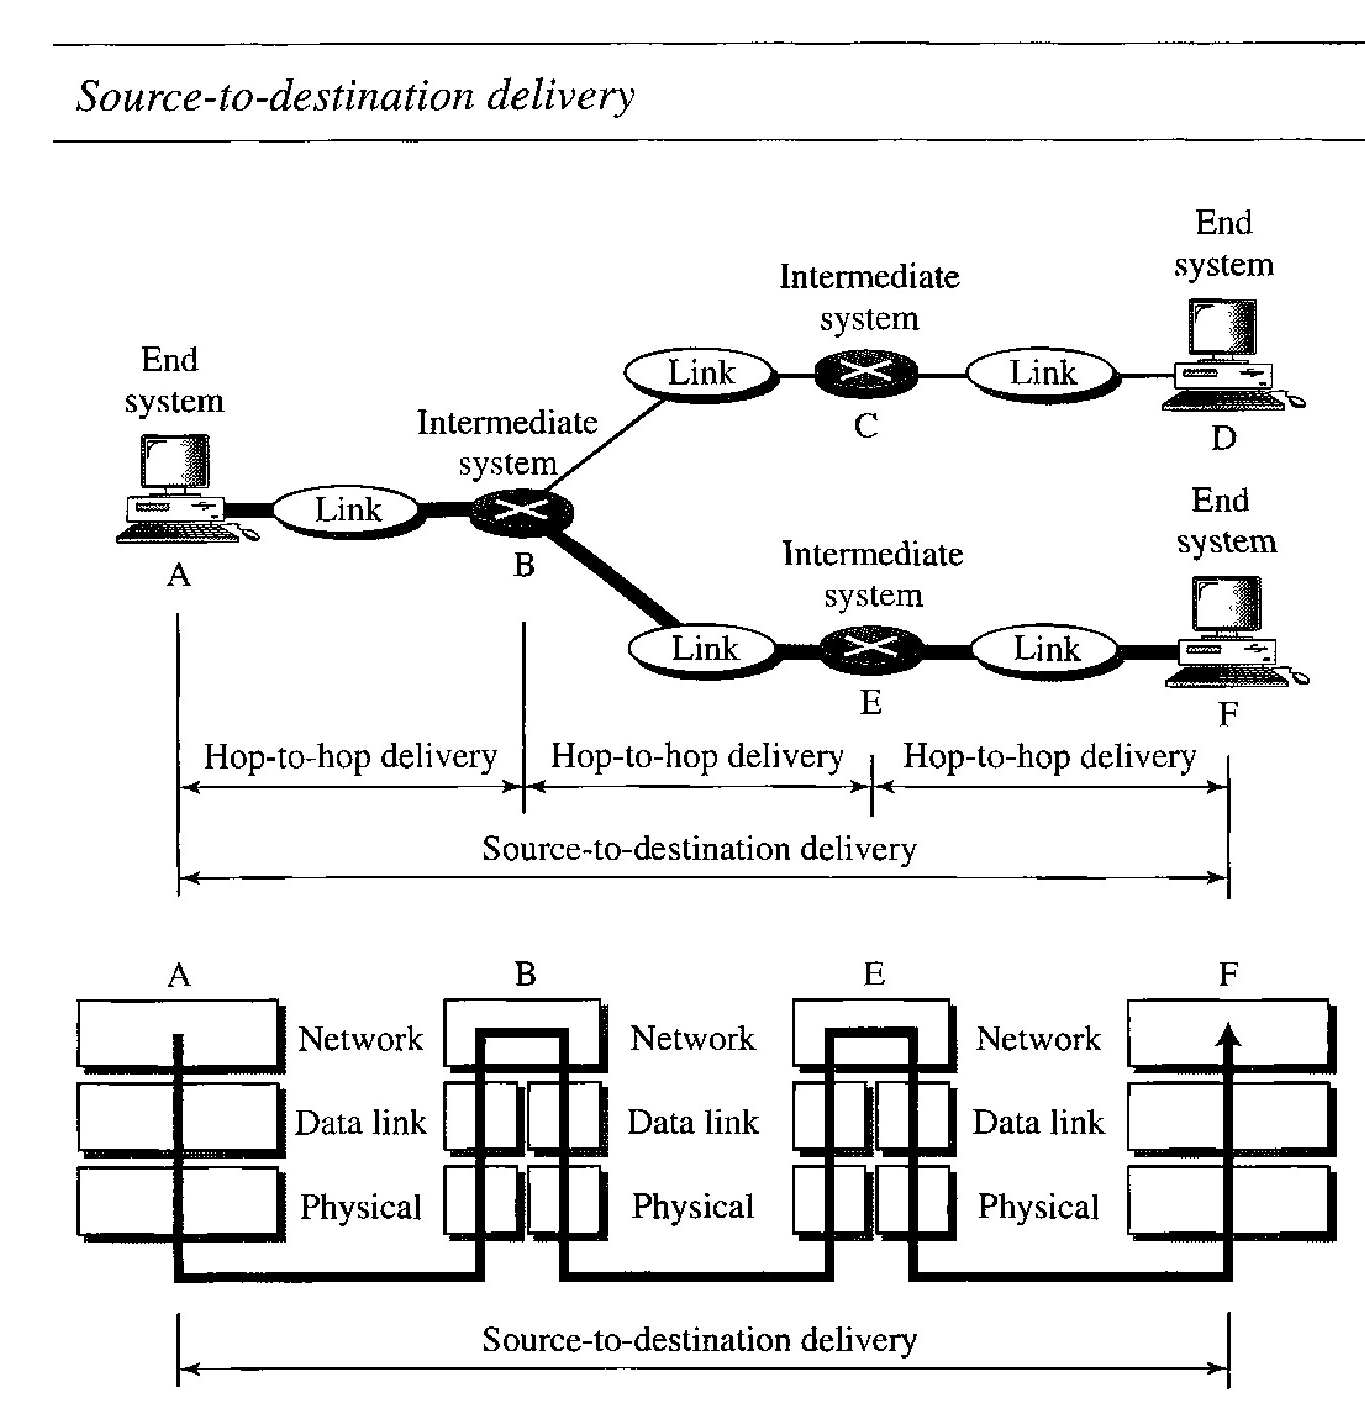 Source-to-destination delivery and role of network layer